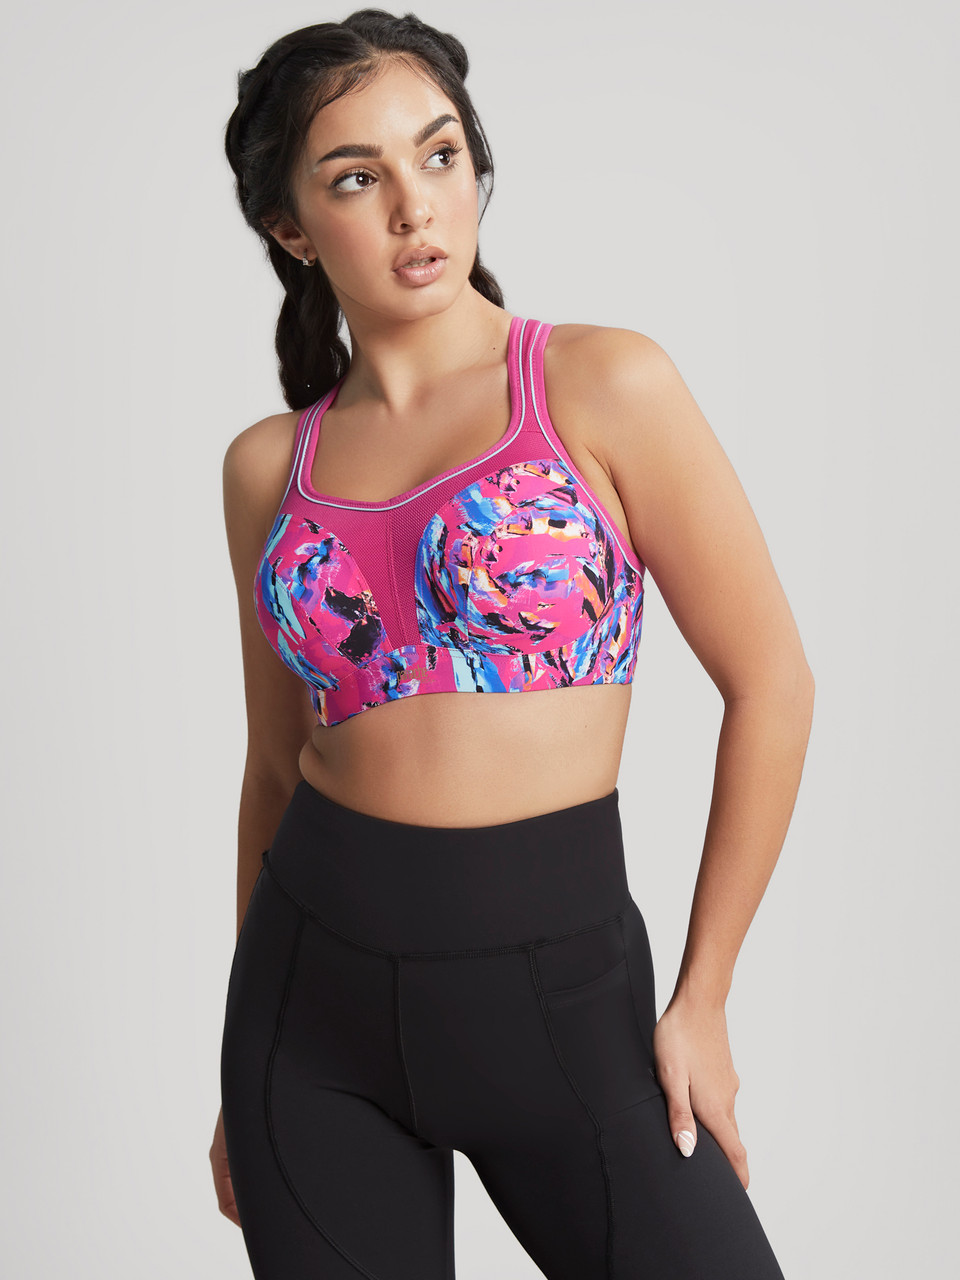 Panache Ultimate High Impact Underwire Sports Bra In Abstract